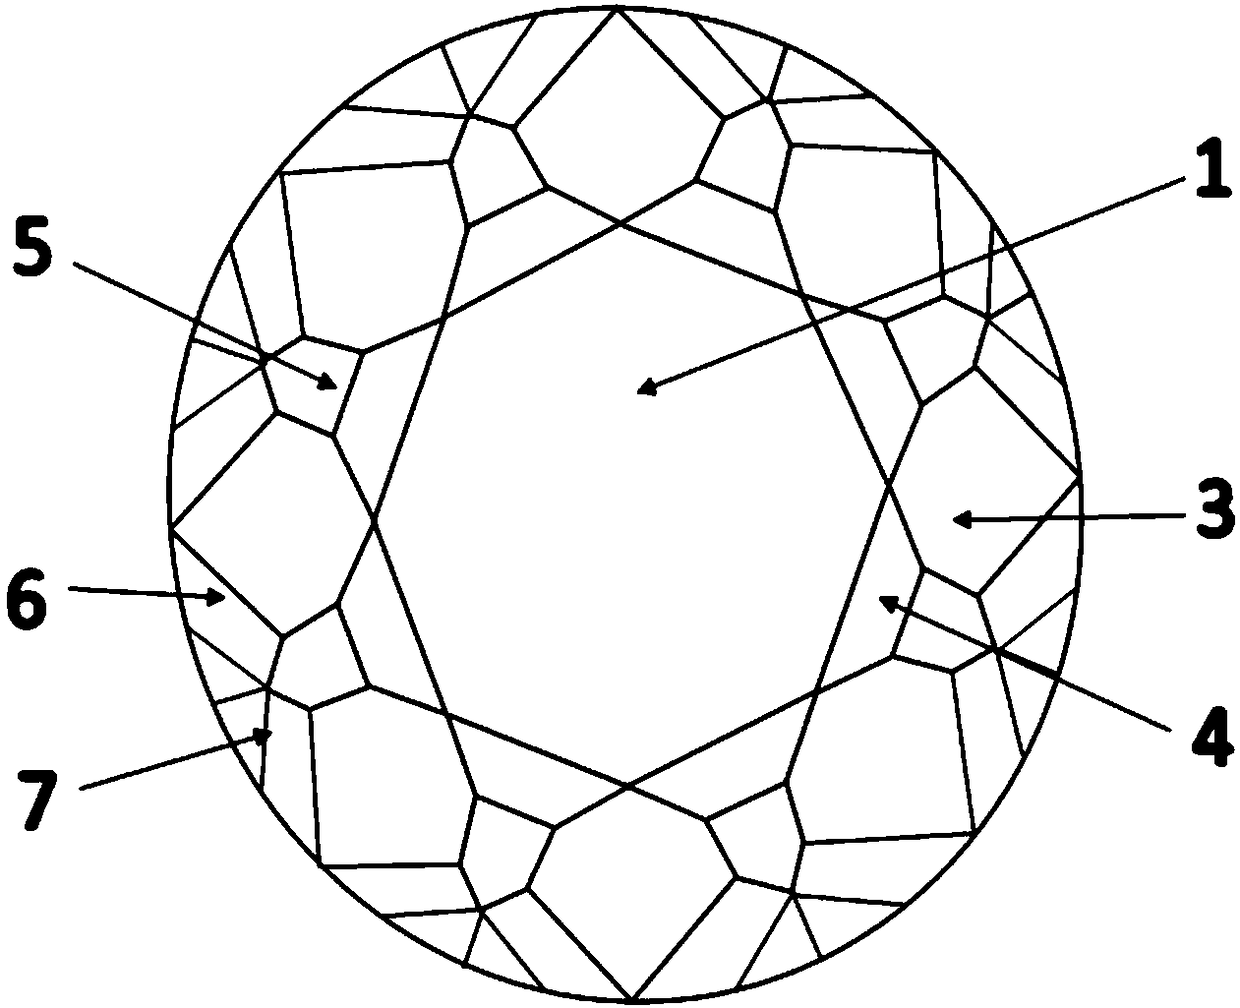 Diamond structure with interior cross-star pattern